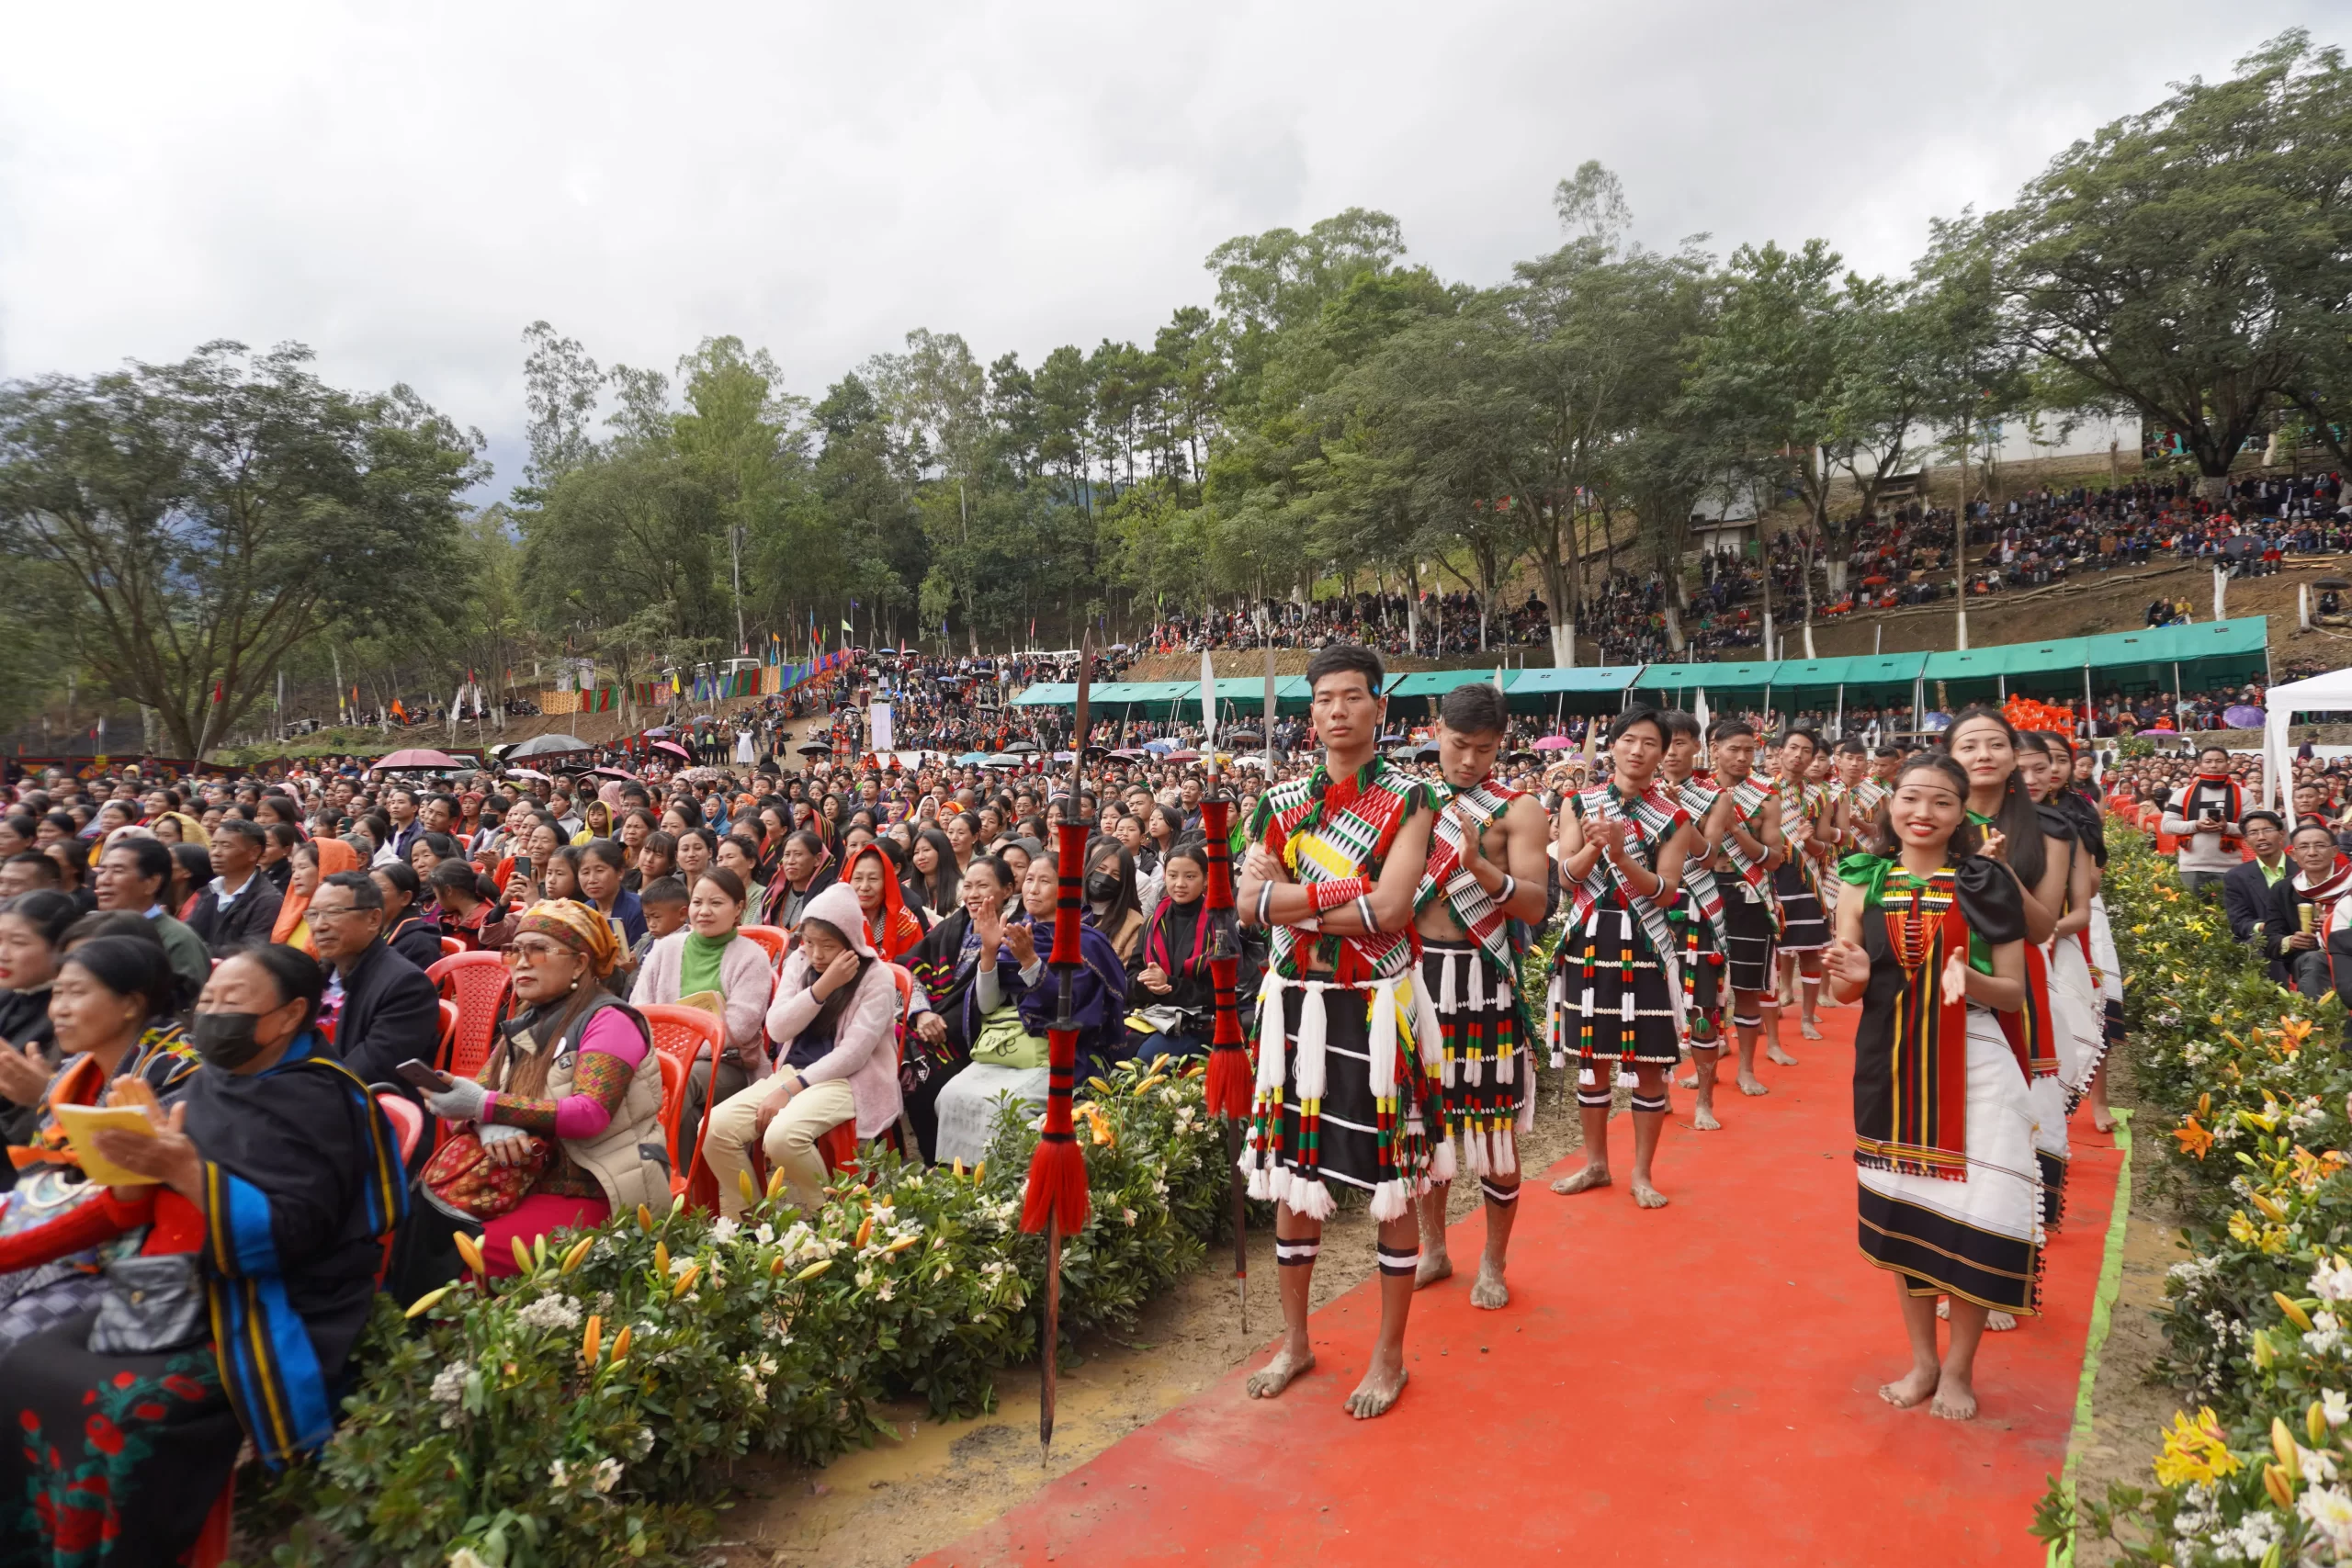 Tribal dancers waiting their turn at the celebration following the installation Mass of the new archbishop of Imphal Archdiocese, Linus Neli. Credit: Anto Akkara